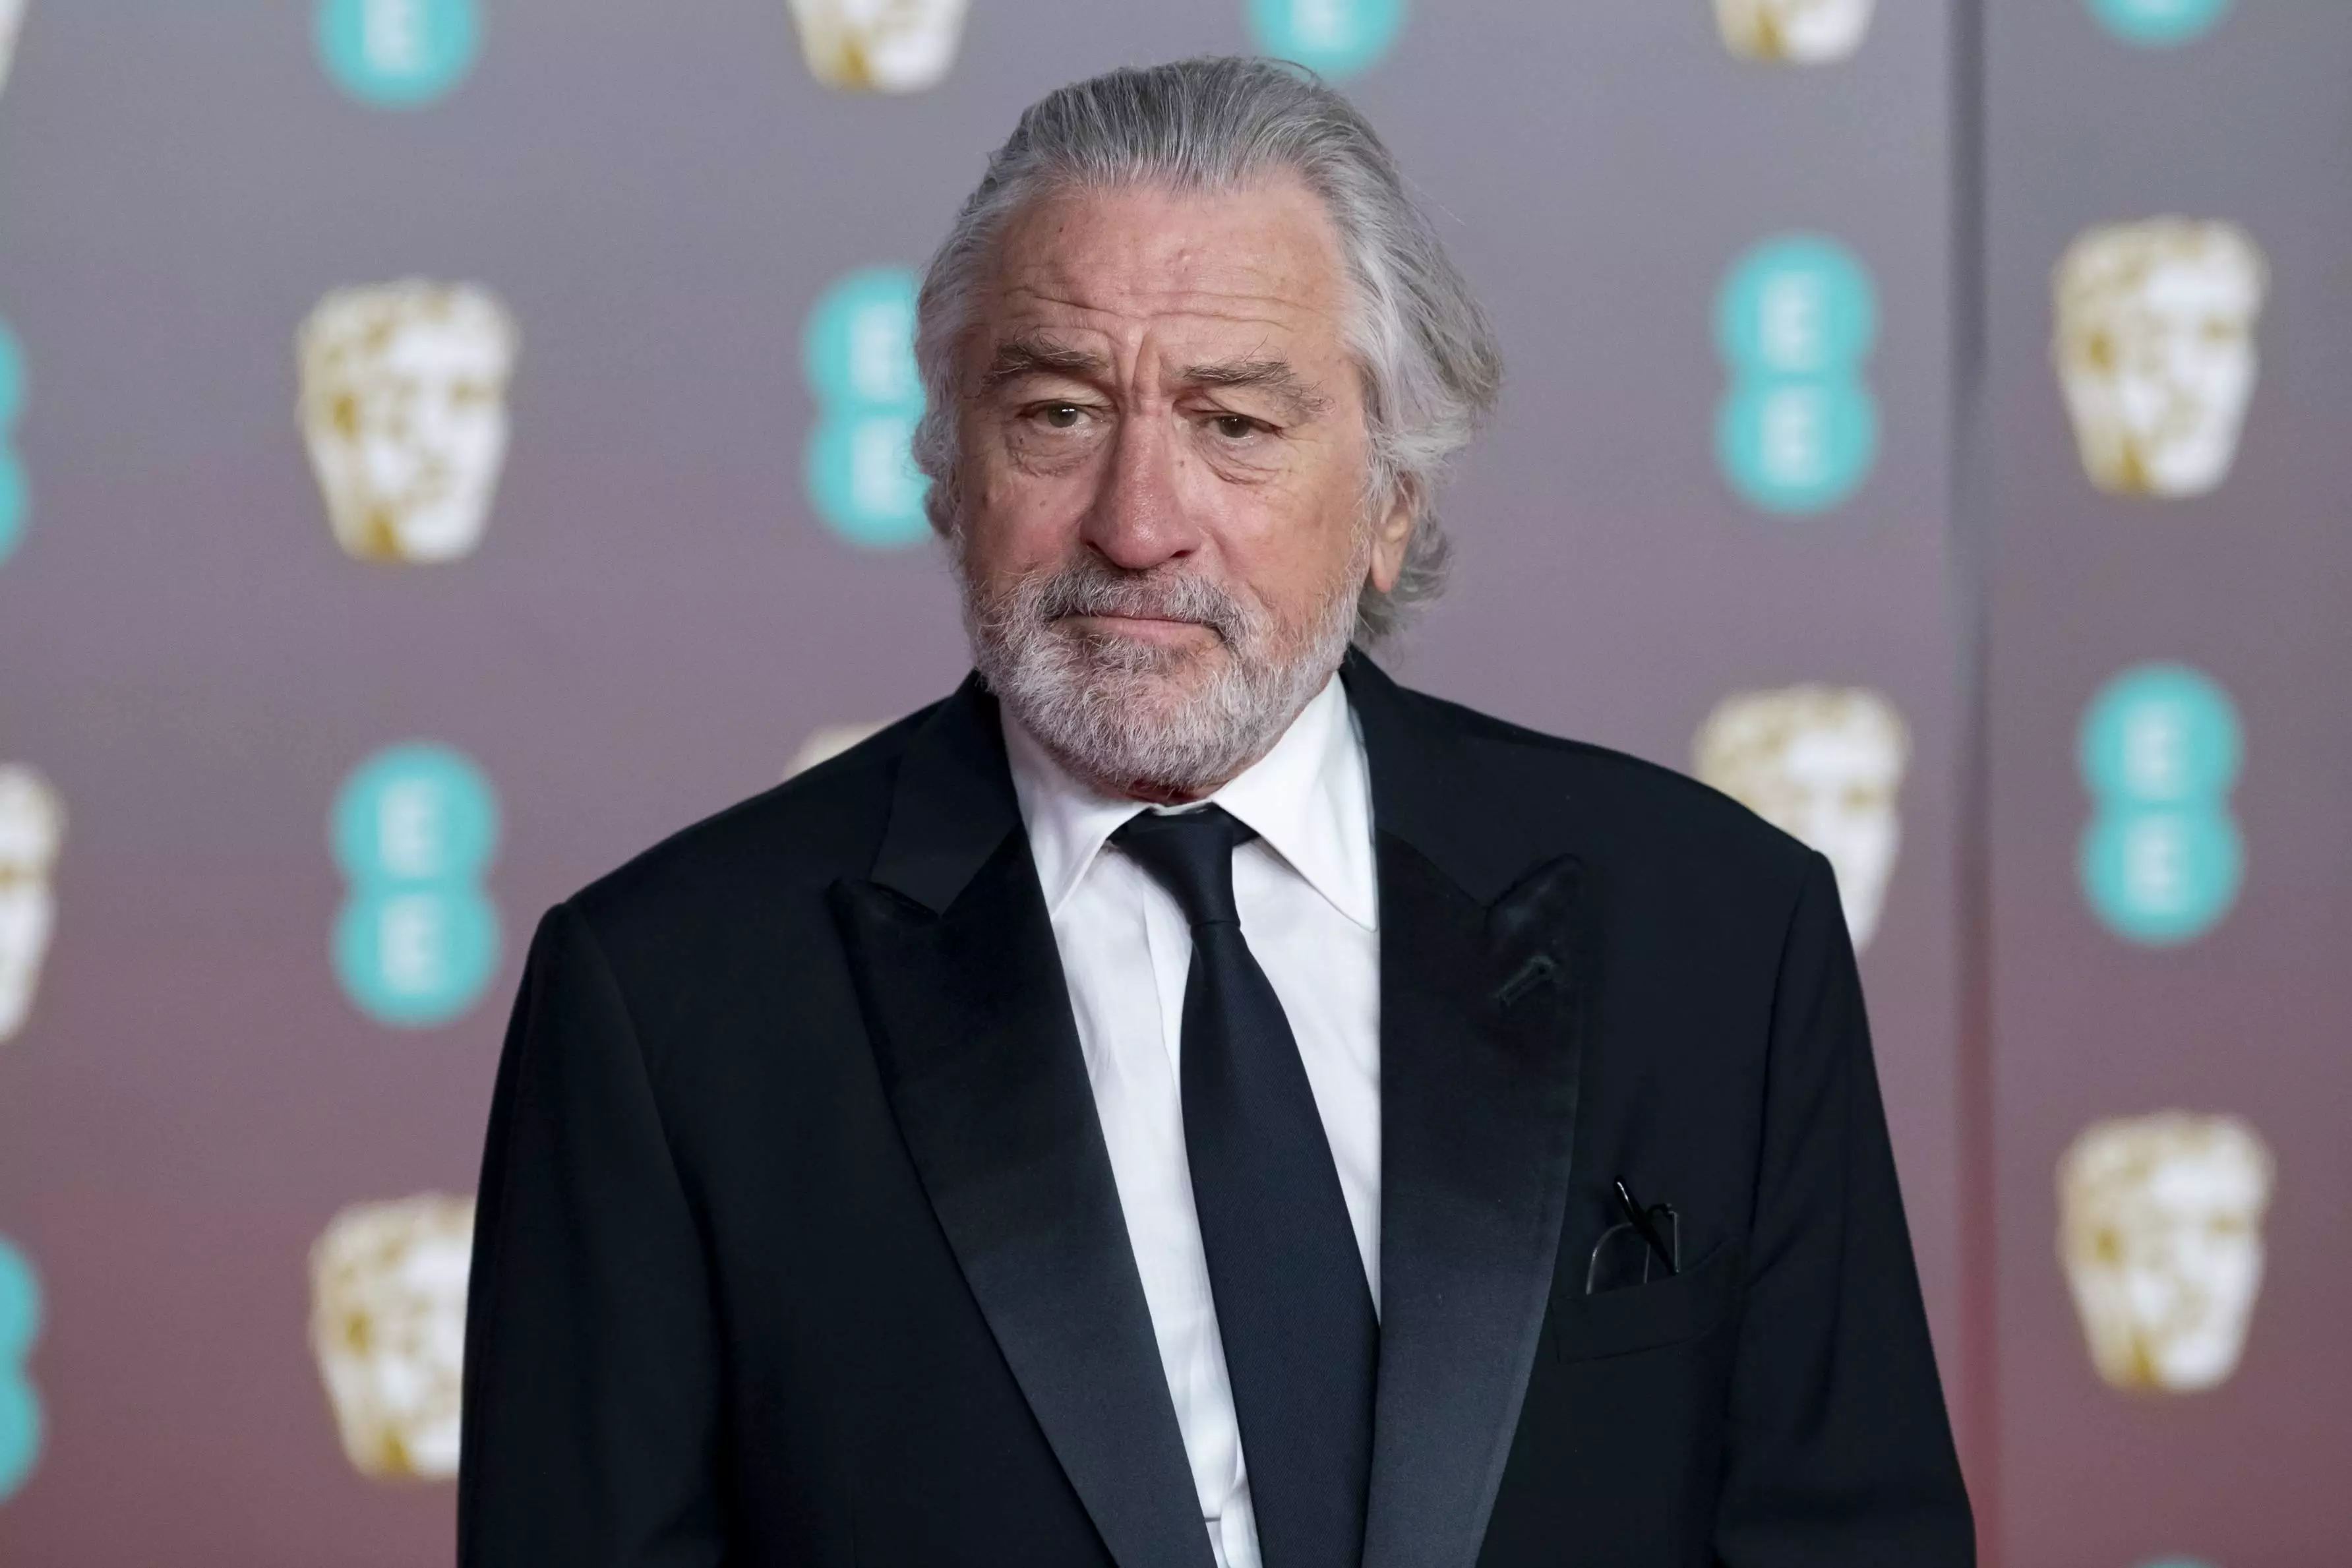 De Niro's lawyers say the actor's finances have been badly affected by Covid-19.